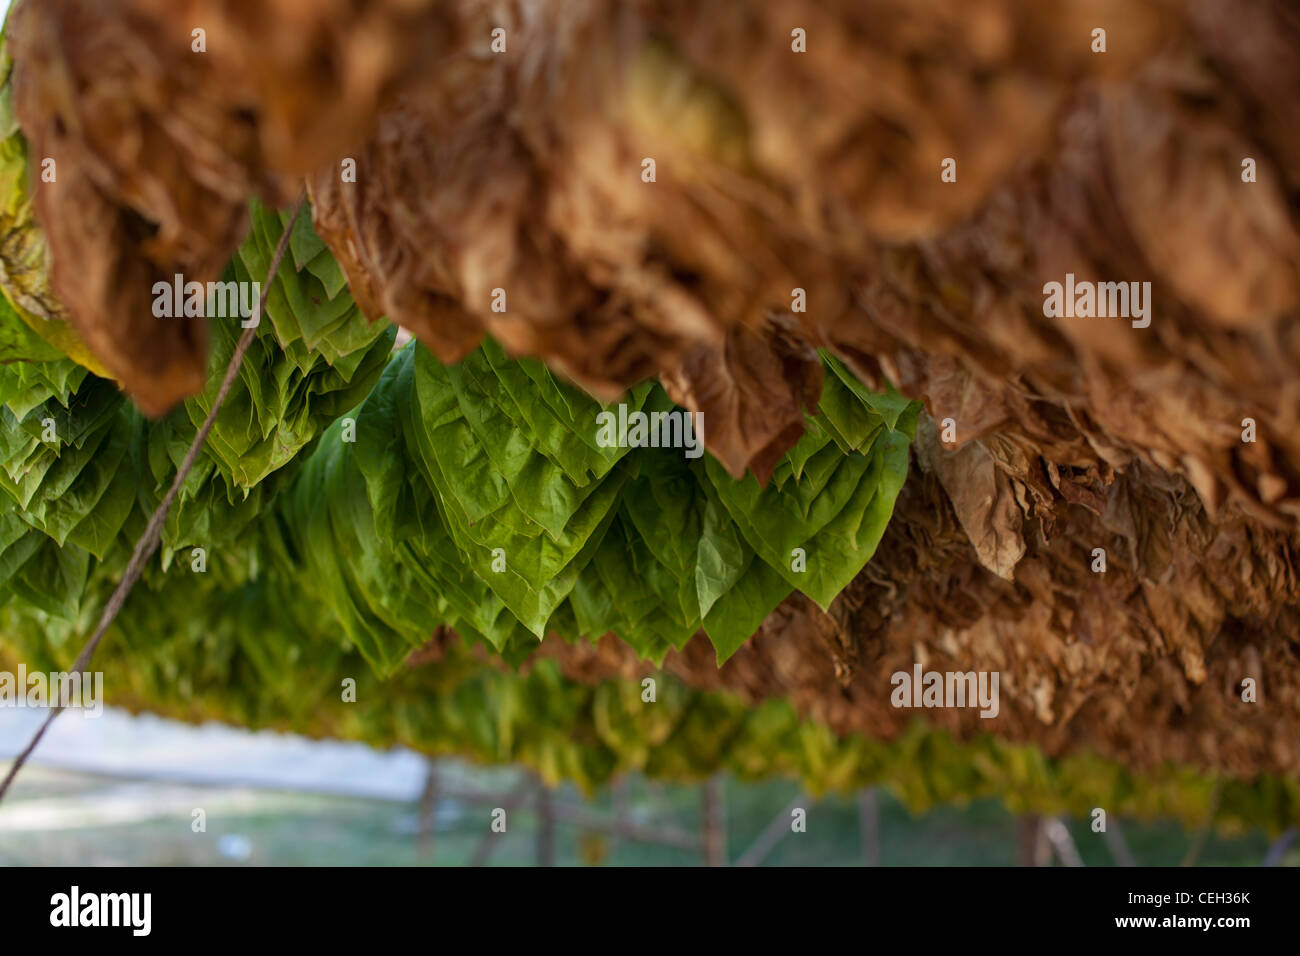 Tobacco farming. Tobacco (Nicotiana sp.) leaves drying in the shade. Stock Photo